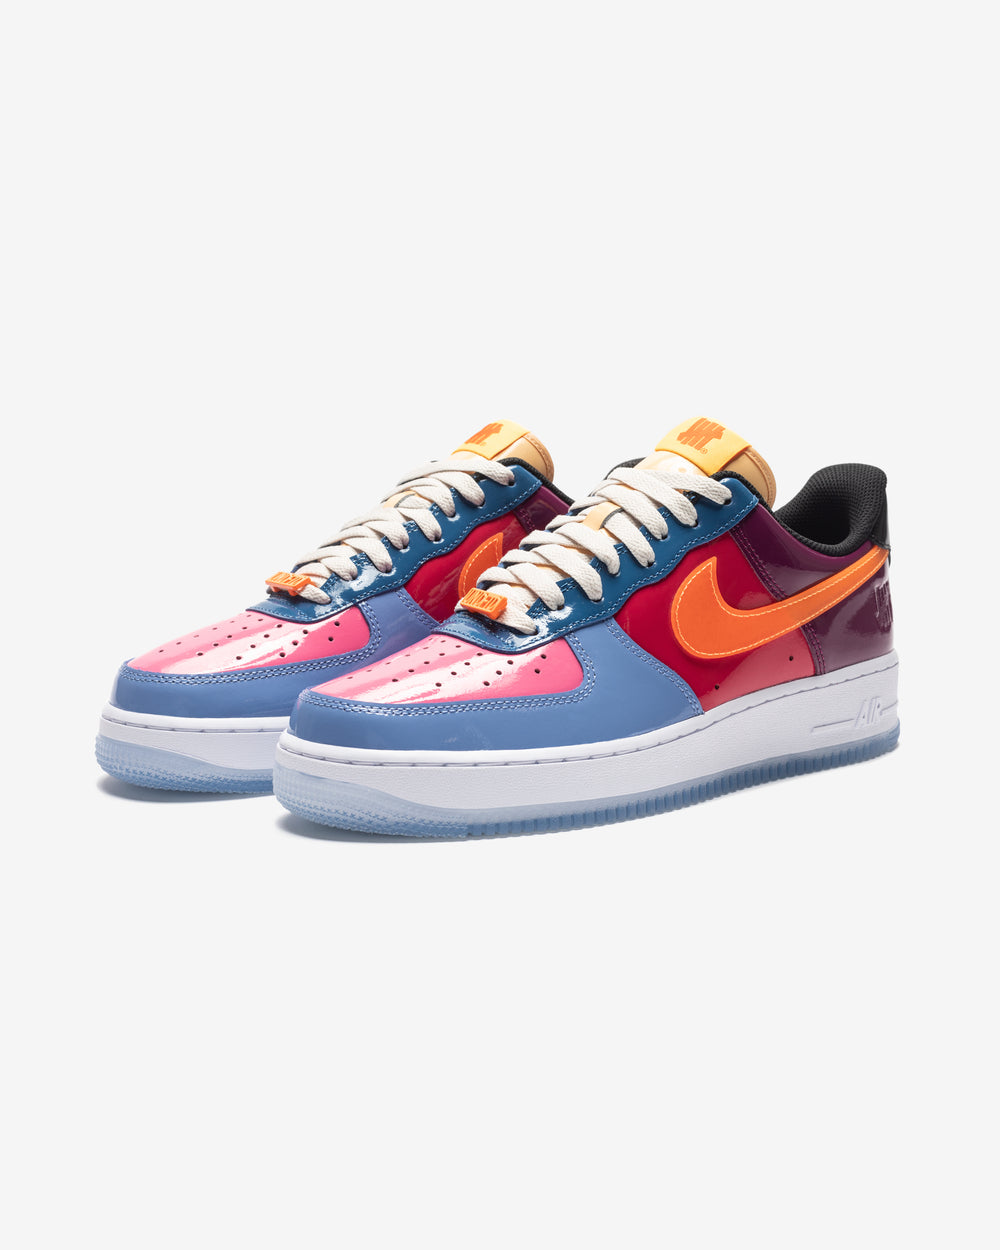 UNDEFEATED X NIKE AIR FORCE 1 LOW SP - POLAR/ ORANGE/ MULTI Undefeated